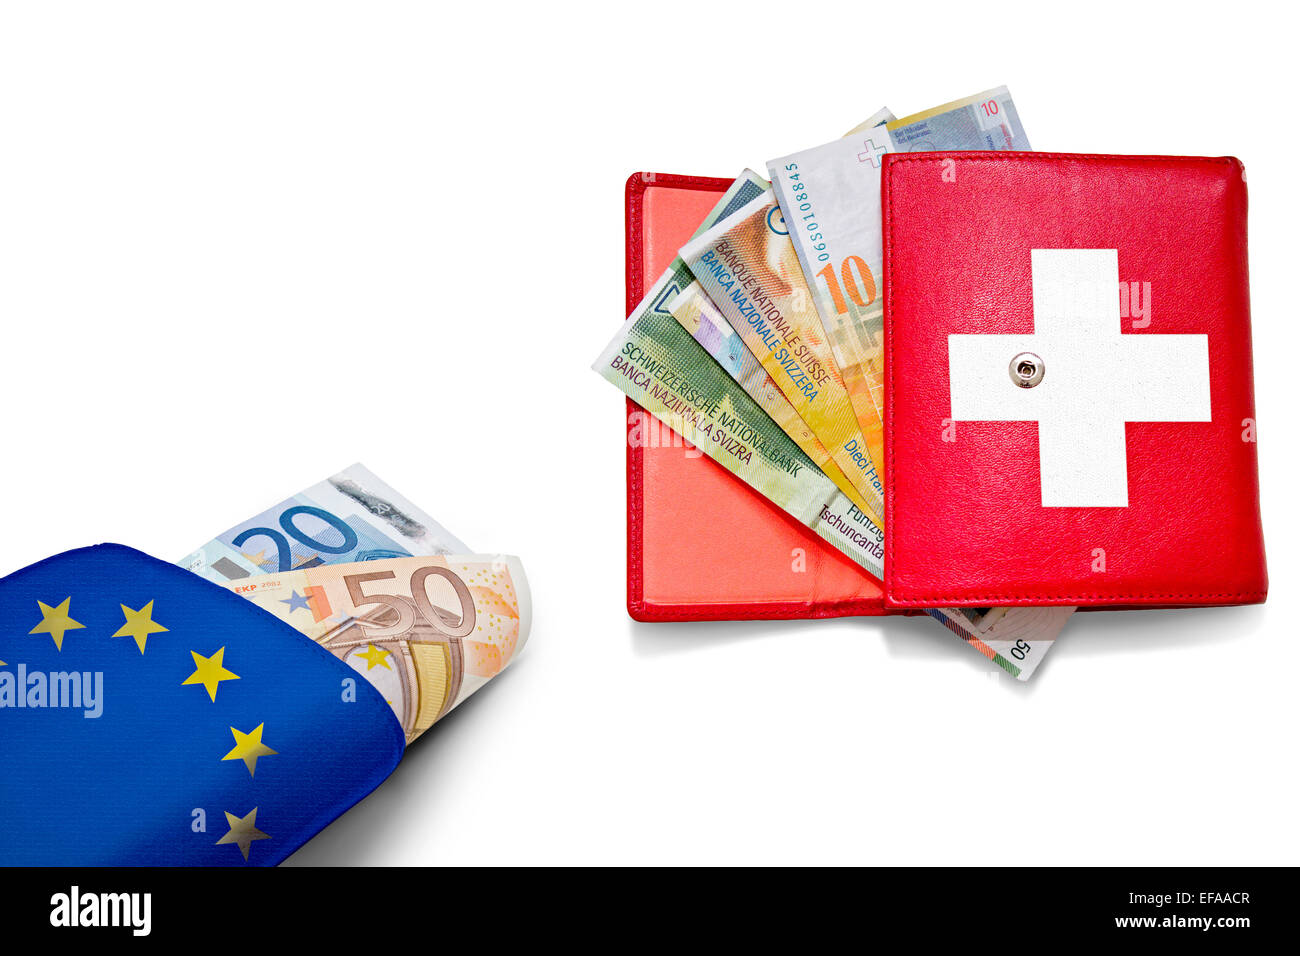 Swiss franc and Euro wallets with national colors banners overlay Stock Photo